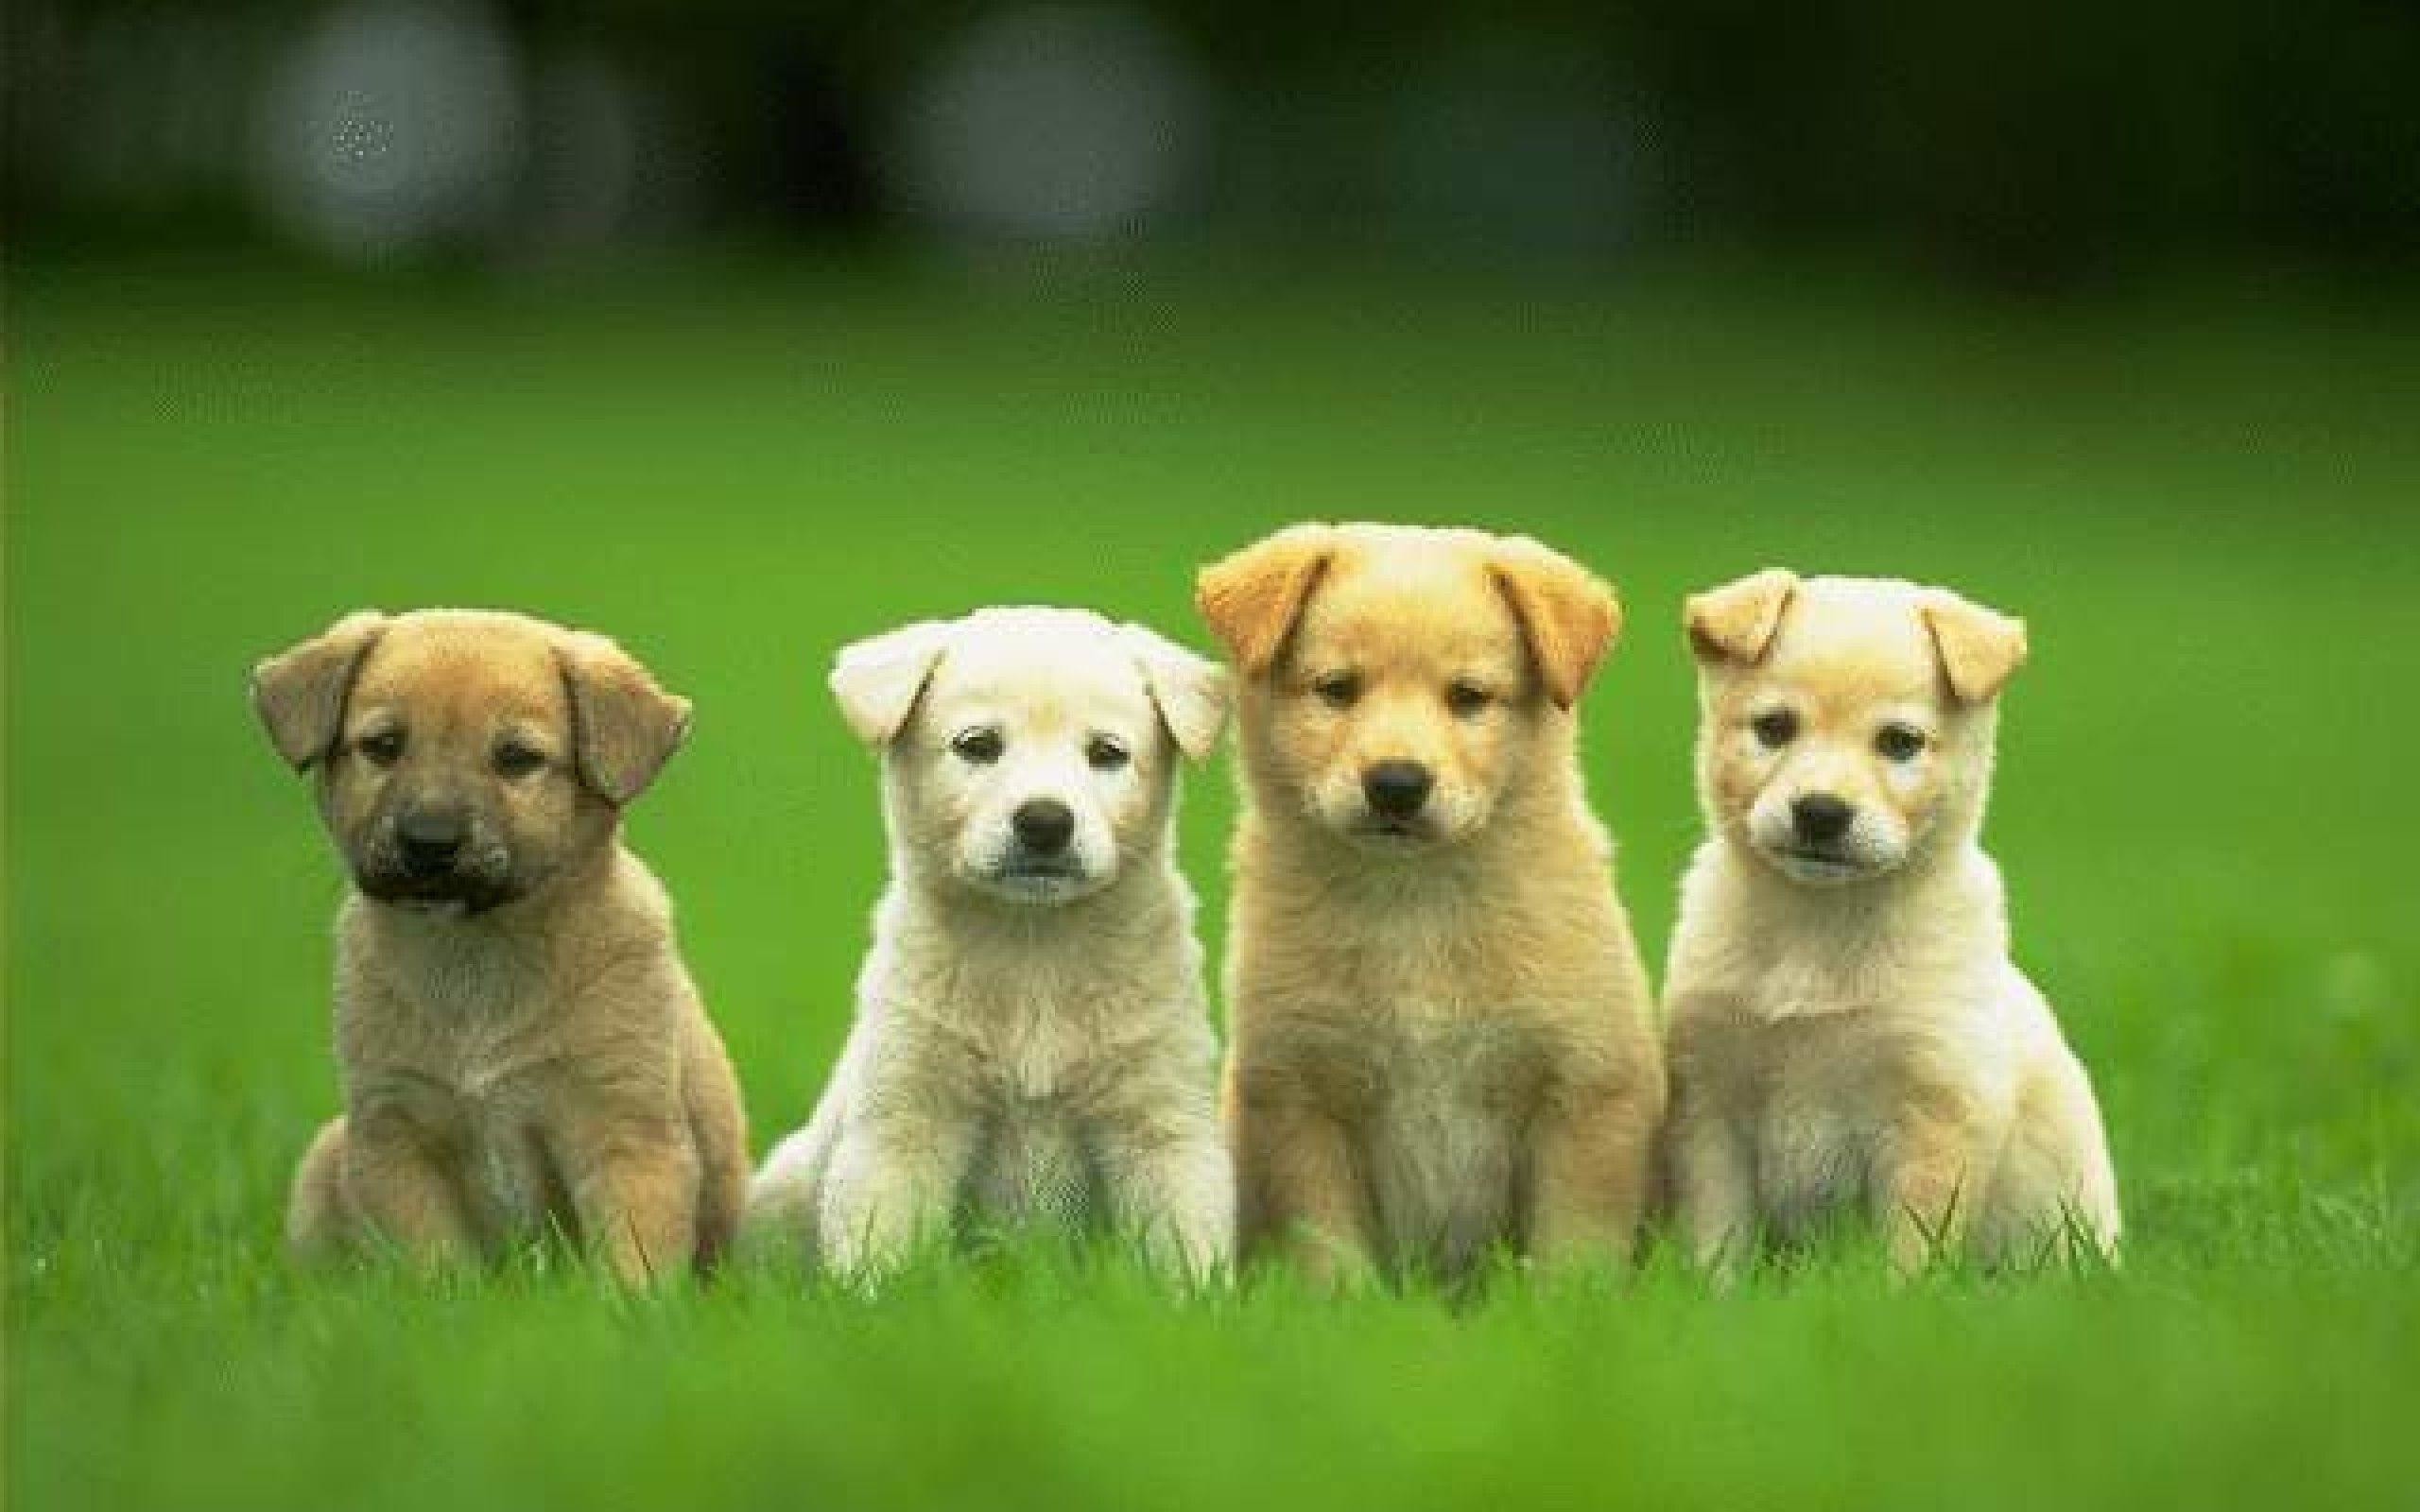 Dogs Laptop Wallpaper Free Dogs Laptop Background